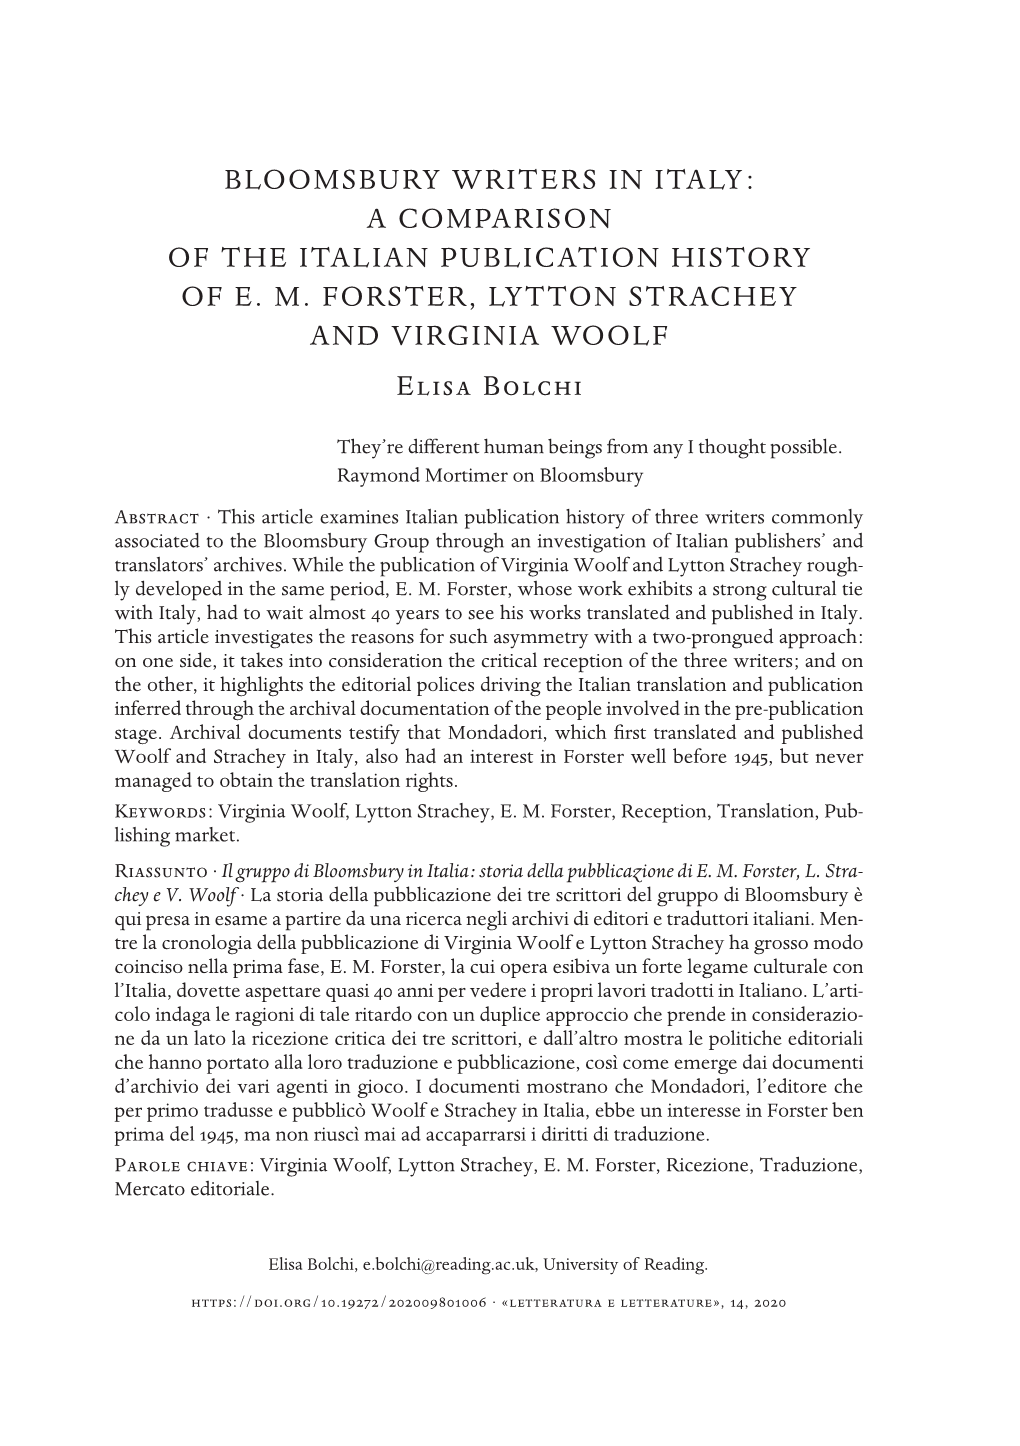 Bloomsbury Writers in Italy: a Comparison of the Italian Publication History of E. M. Forster, Lytton Strachey and Virginia Wool